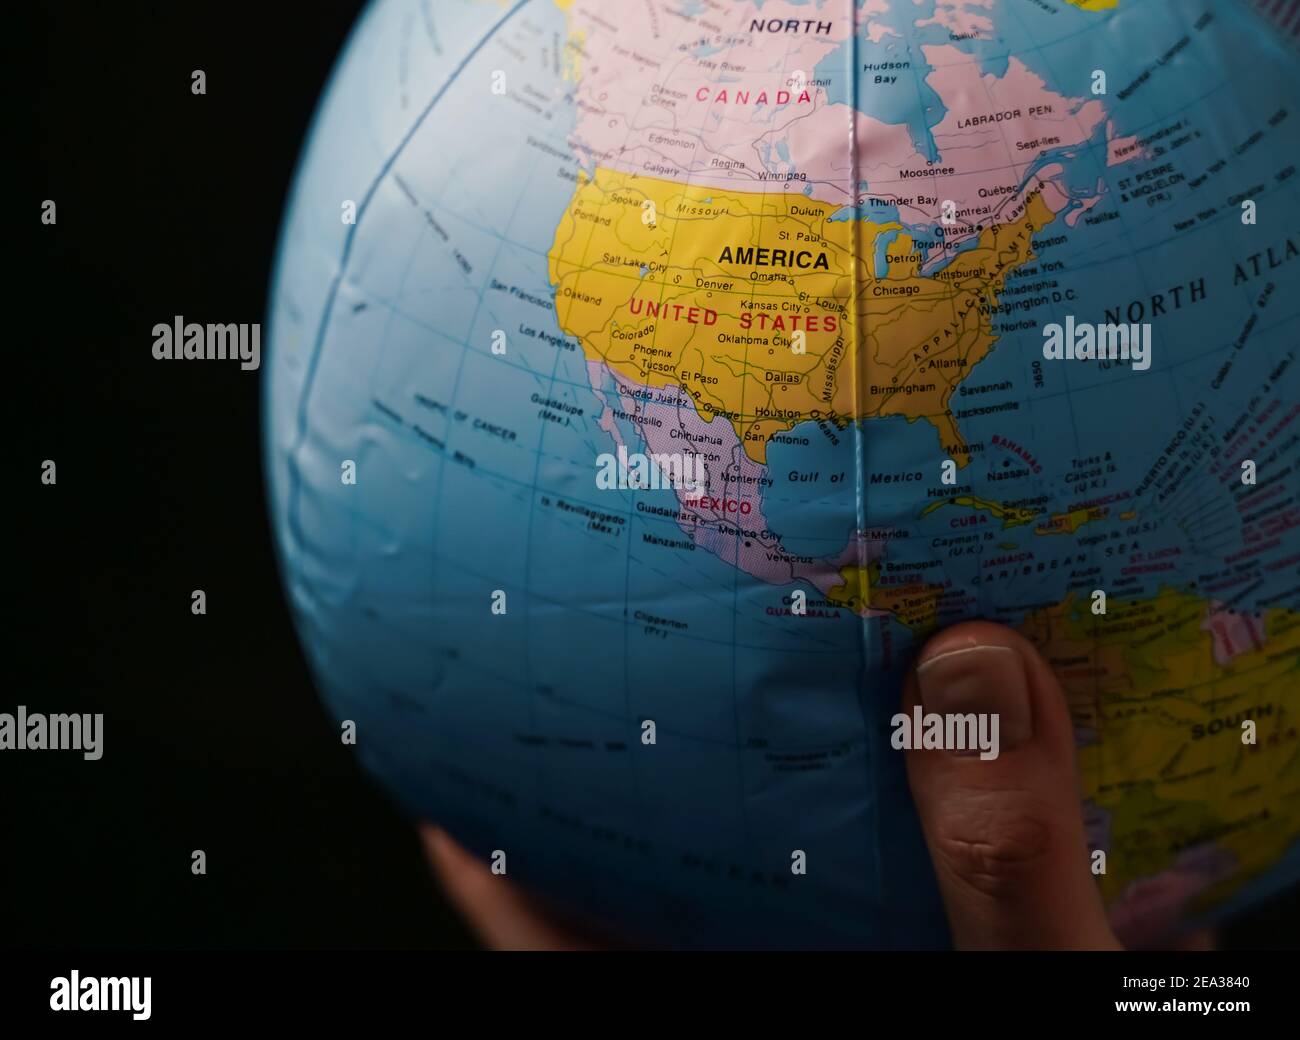 Globe showing the north American continent held in a hand. Stock Photo